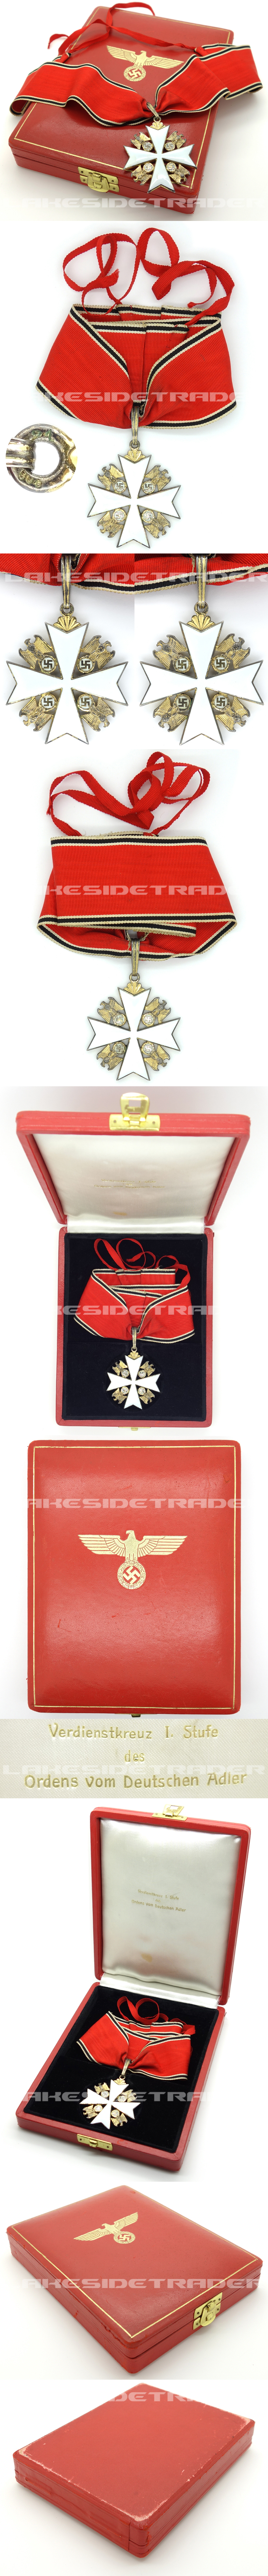 Cased 1st Class Eagle Order Neck Cross by 21